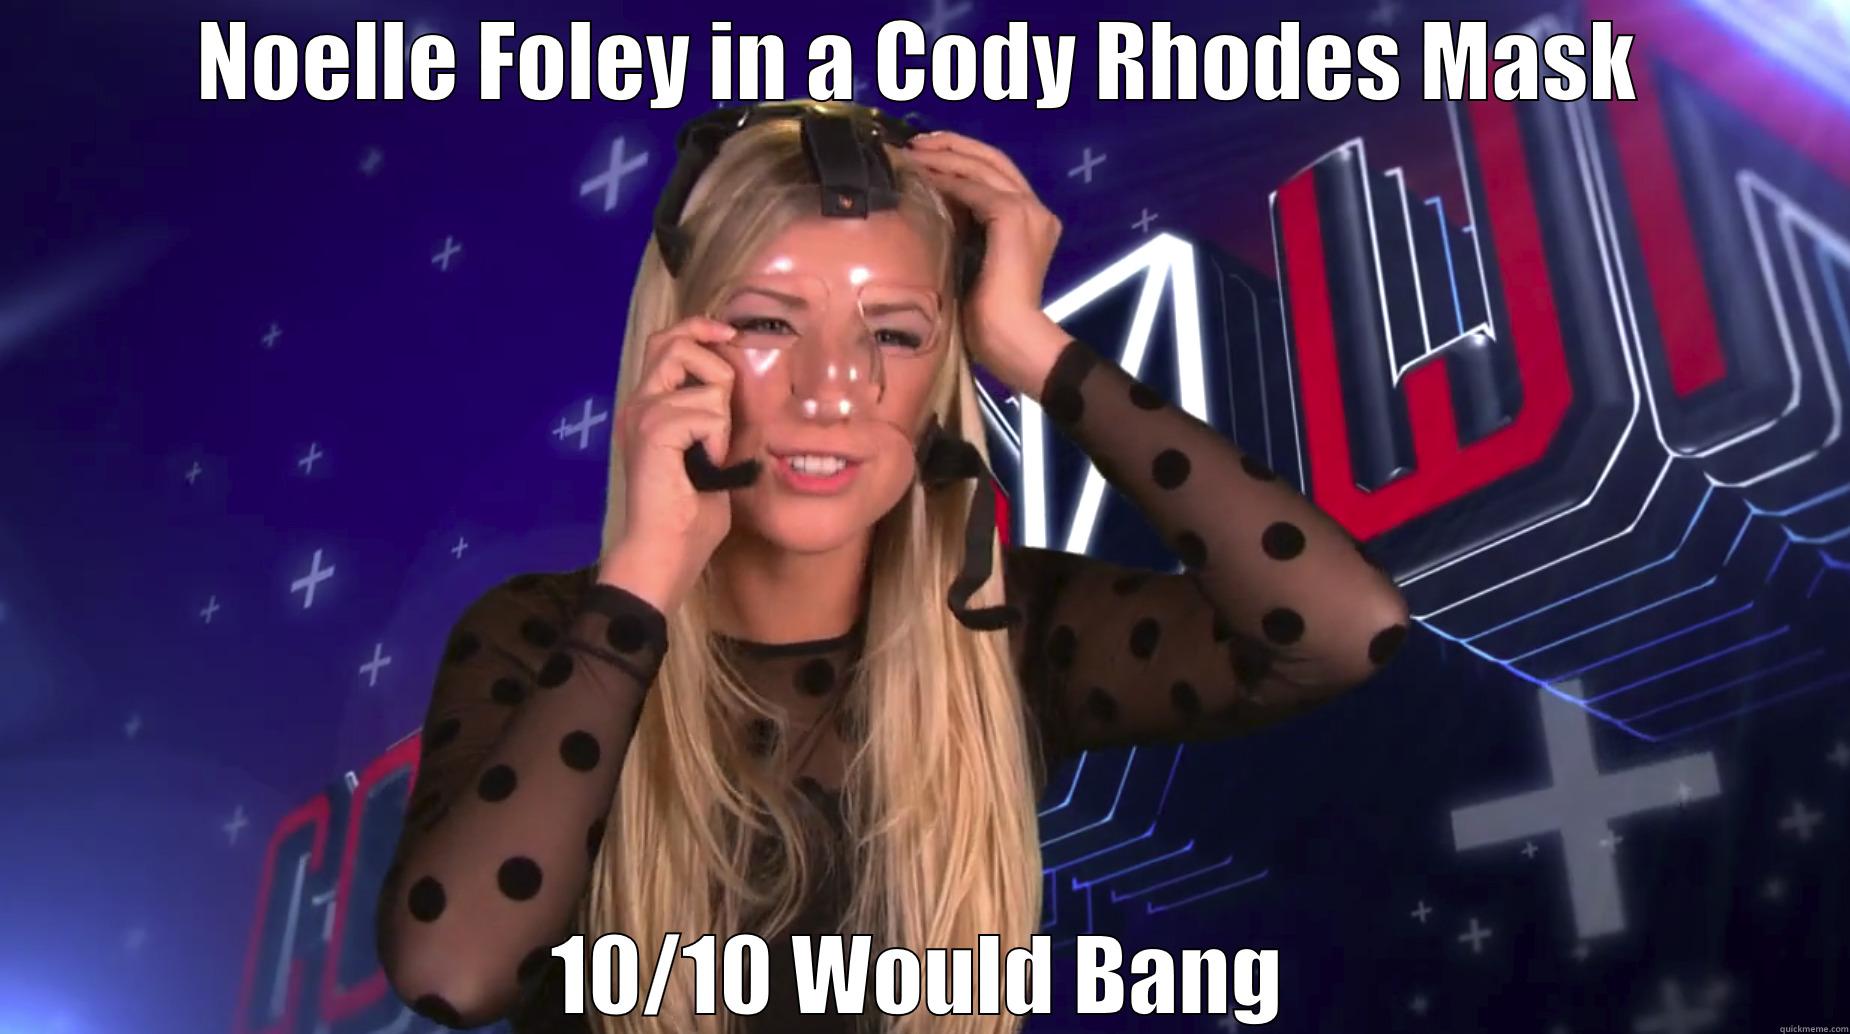 noelle foley - NOELLE FOLEY IN A CODY RHODES MASK 10/10 WOULD BANG Misc